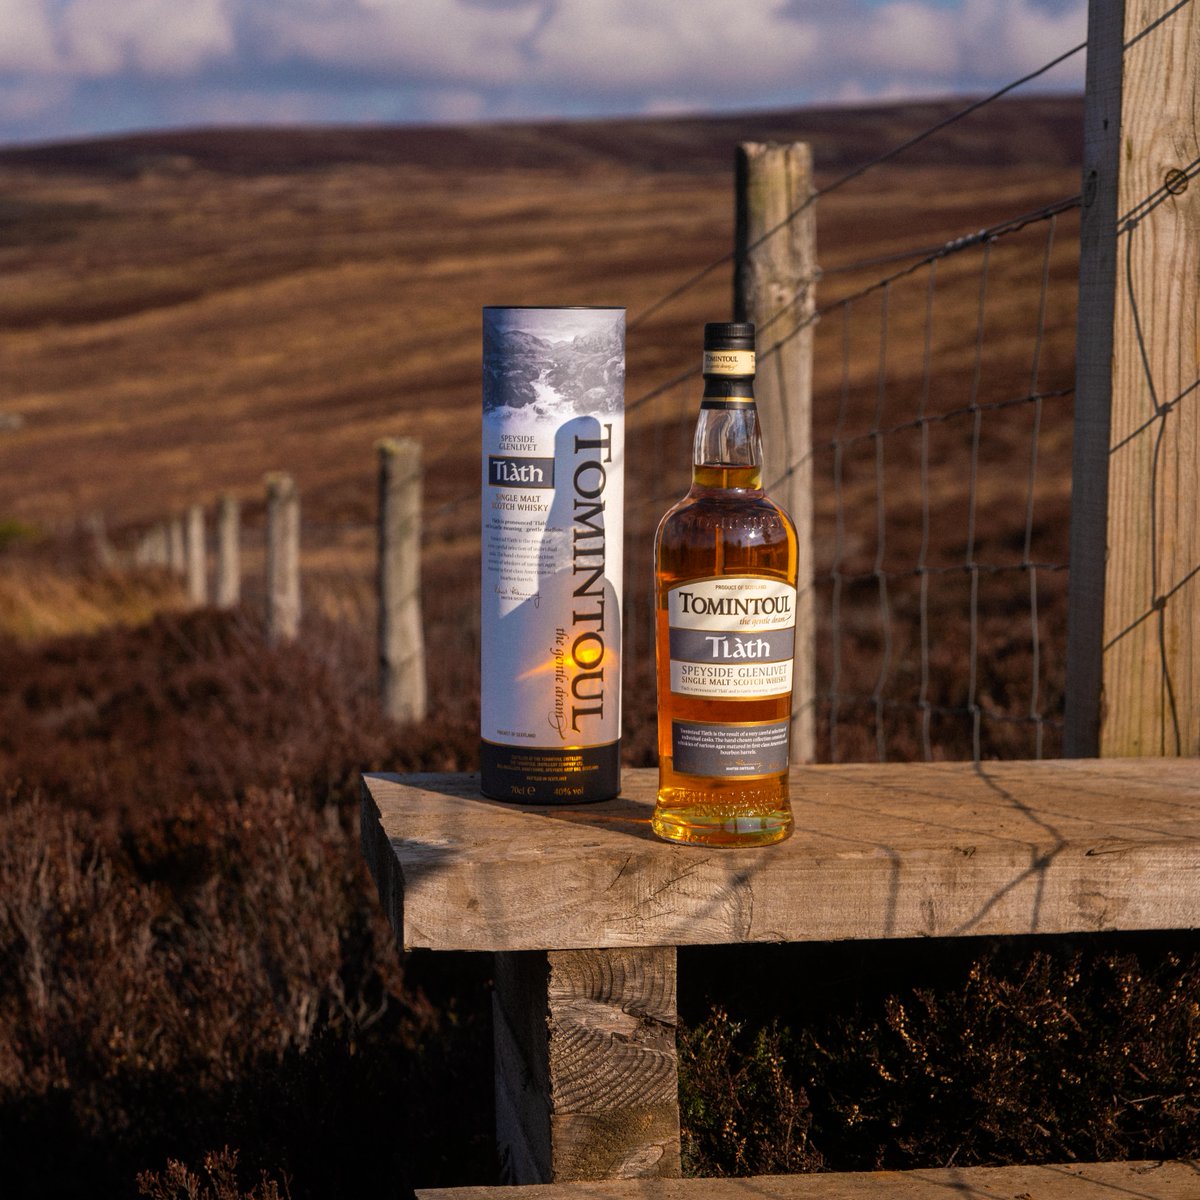 Tomintoul Tlàth is created using specially hand-chosen casks of whisky of various ages, matured in first-class American oak bourbon barrels. Tlàth, meaning ‘gentle’ in Scots Gaelic, is the perfect smooth and approachable dram for the single malt aficionado.